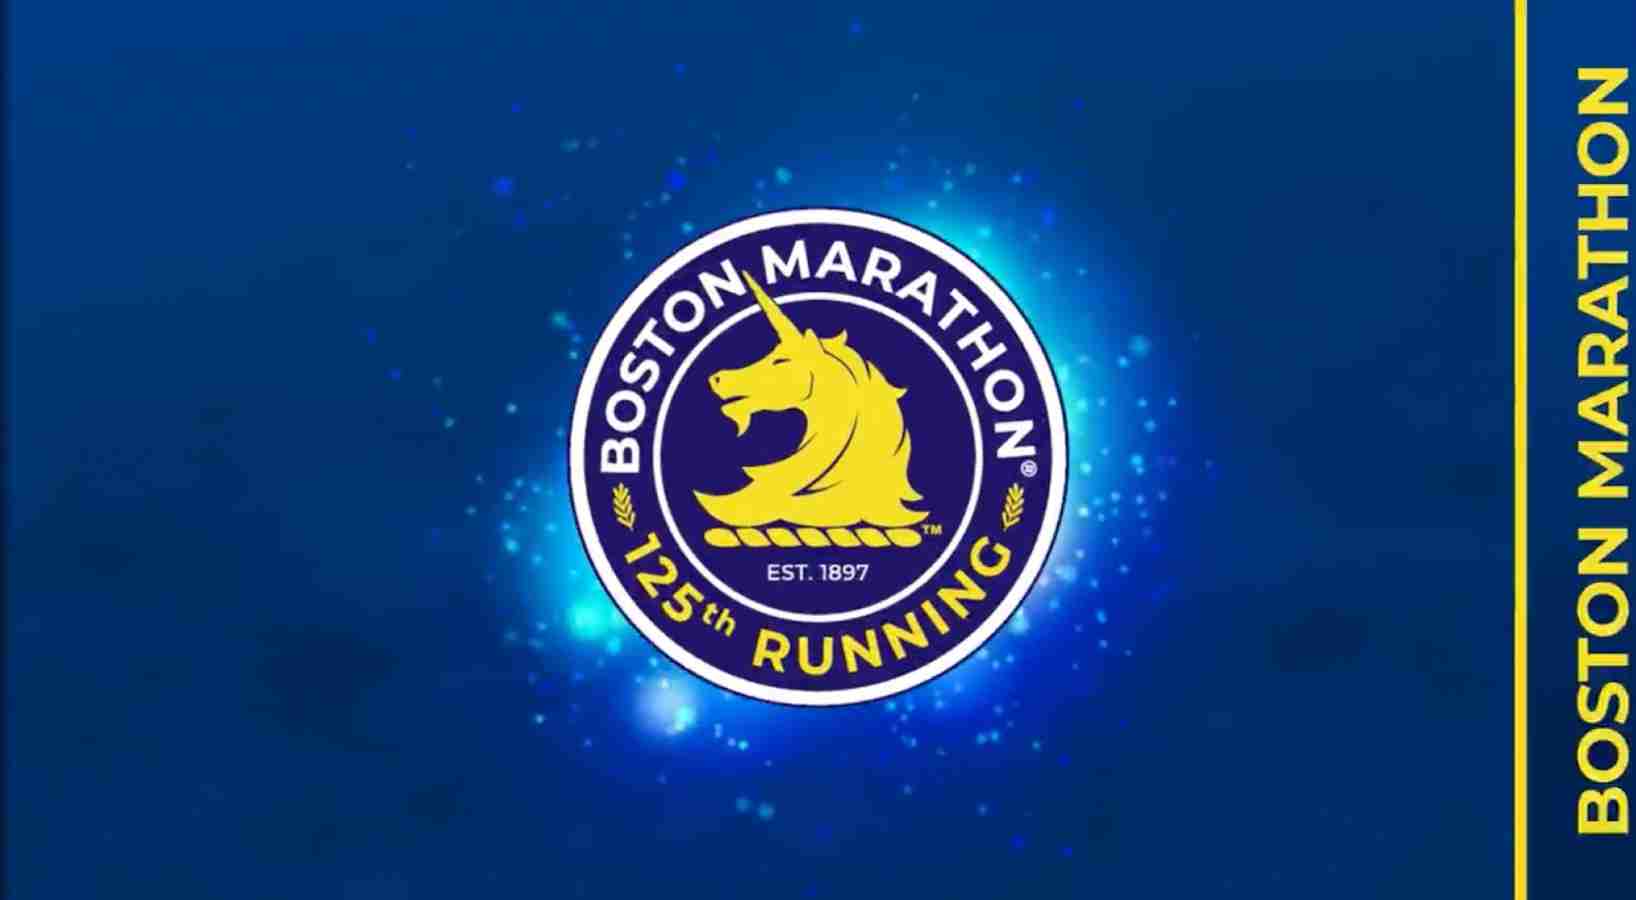 How to watch the 2021 Boston Marathon live streaming and TV channels